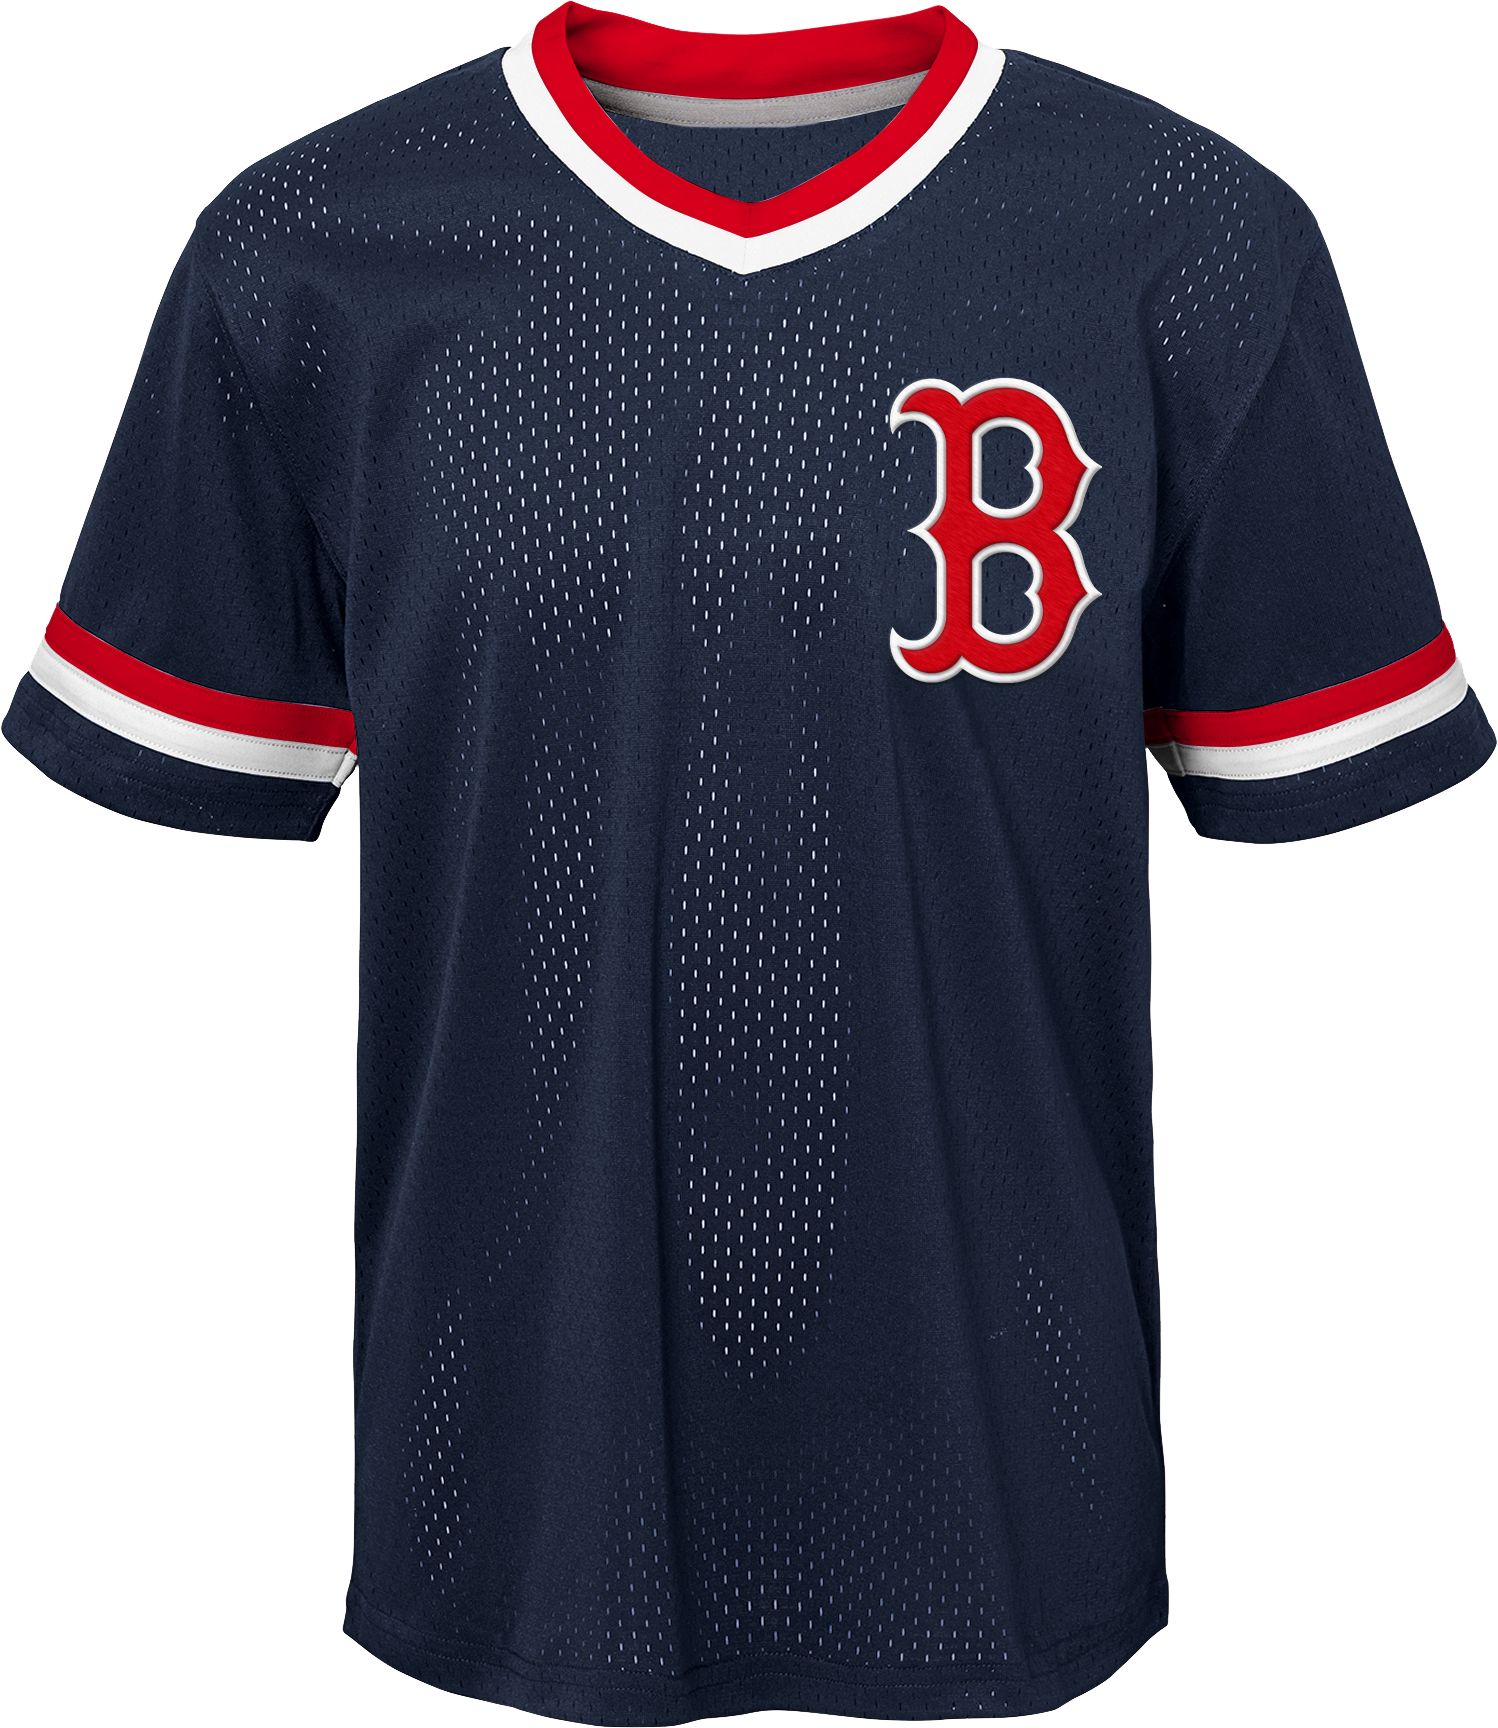 womens red sox jersey sale